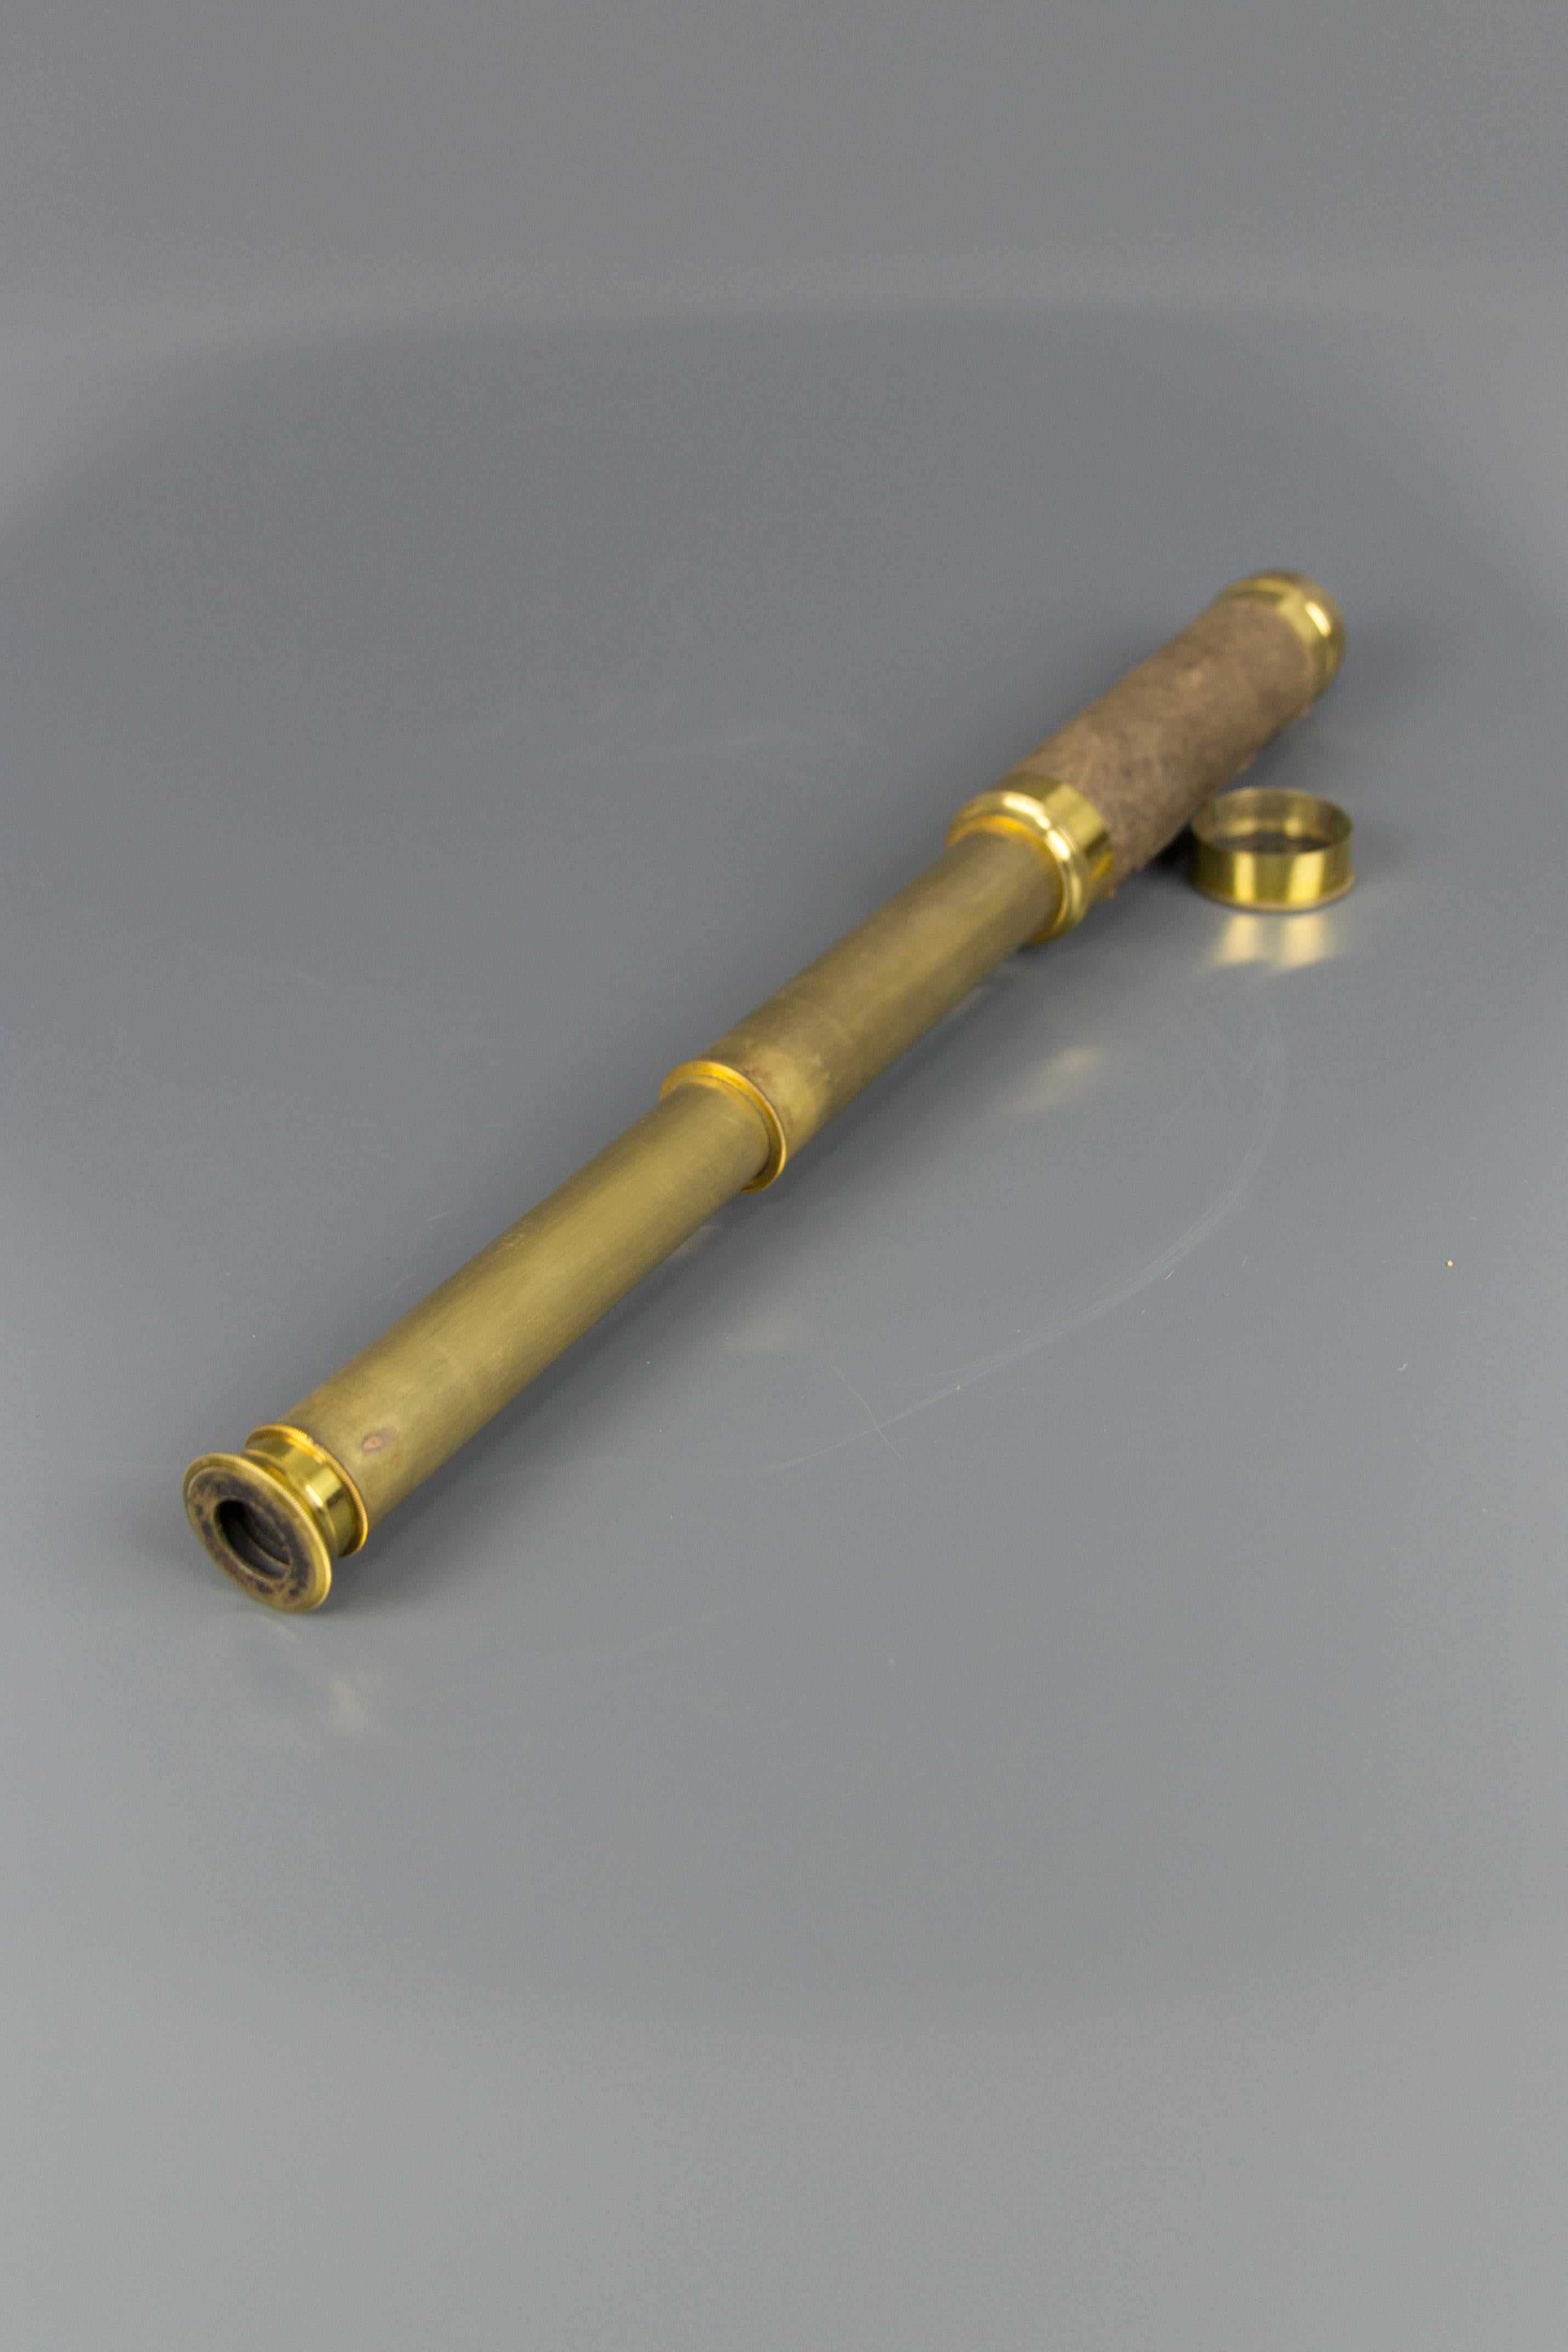 Late 19th century French brass and leather 3 draw telescope spyglass.
The spyglass is made from brass. The base is wrapped with leather. Comes with the original case.
When extended, it measures 57 cm / 22.44 in long. When closed, the spyglass